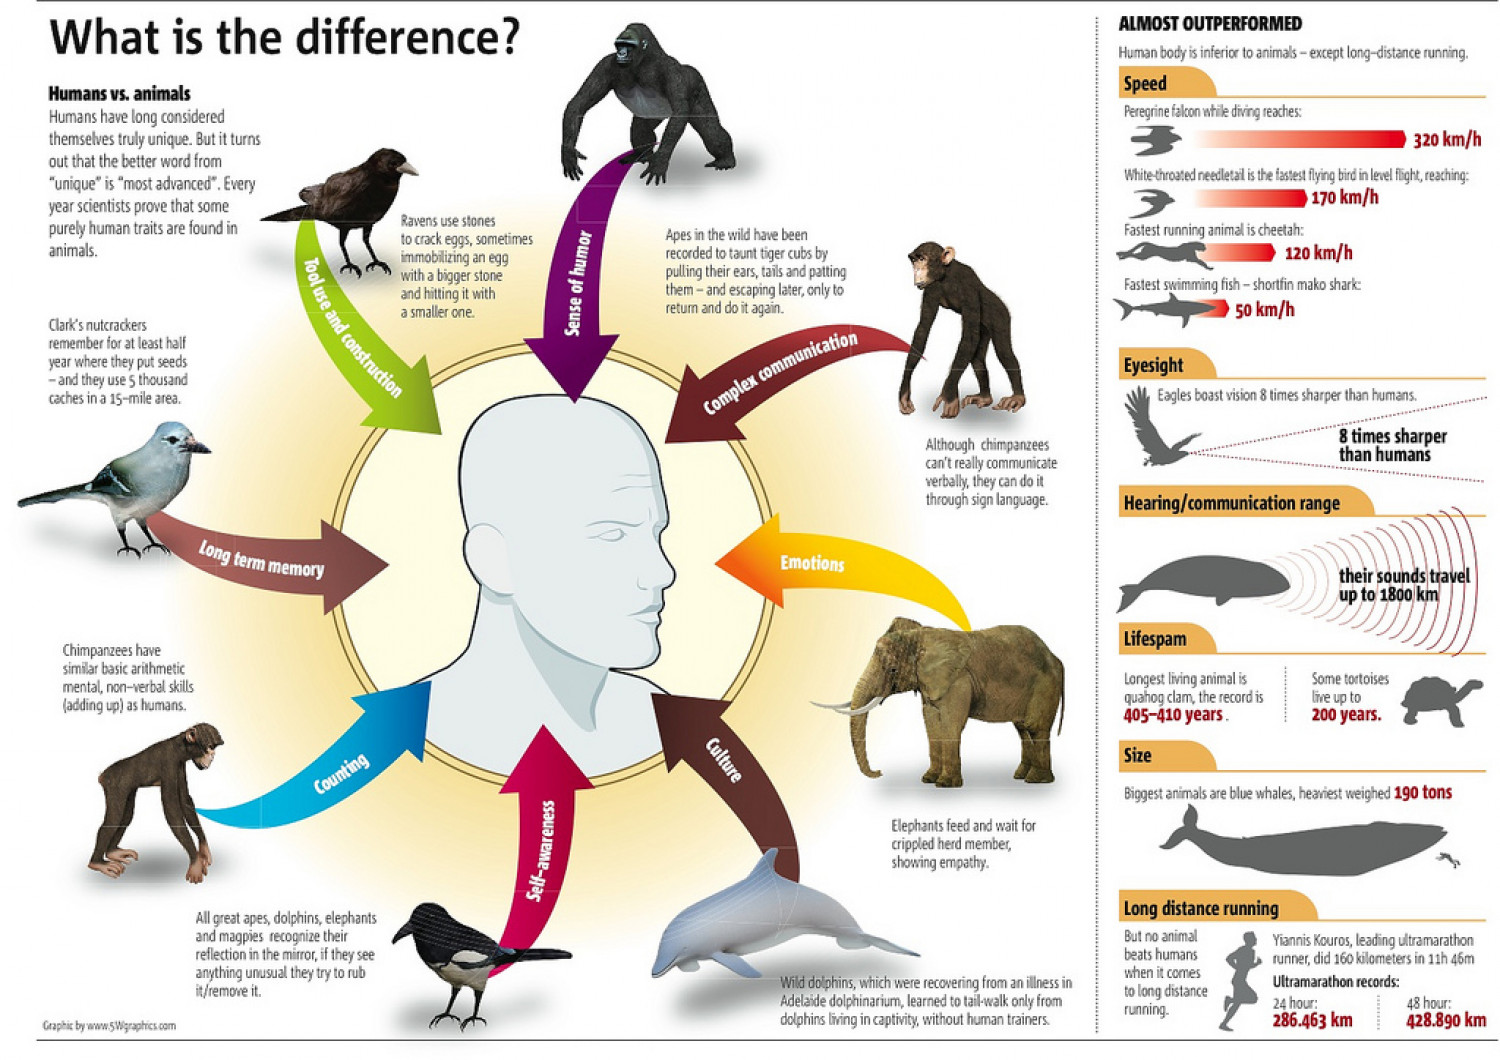 What is the difference between animals and humans?